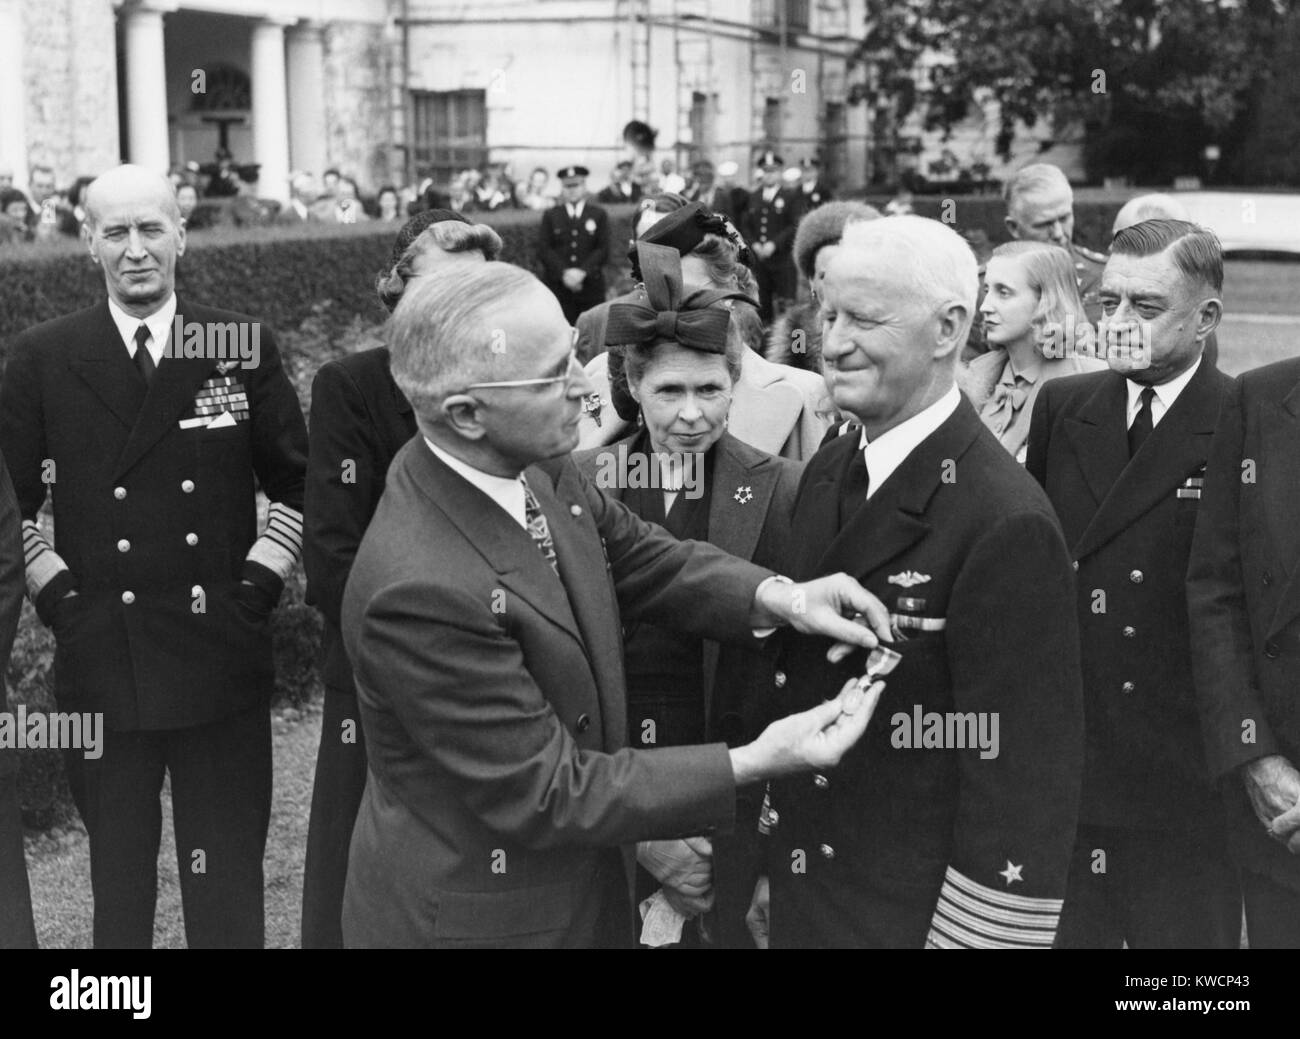 President Harry Truman awarding Admiral Chester Nimitz a Gold Star at the White House. Nimitz was Commander of U.S. Pacific Fleet during World War 2. At far left is Adm. Ernest King; Mrs. Catherine Nimitz is beside her husband. Oct. 5, 1945. - (BSLOC 2014 15 28) Stock Photo